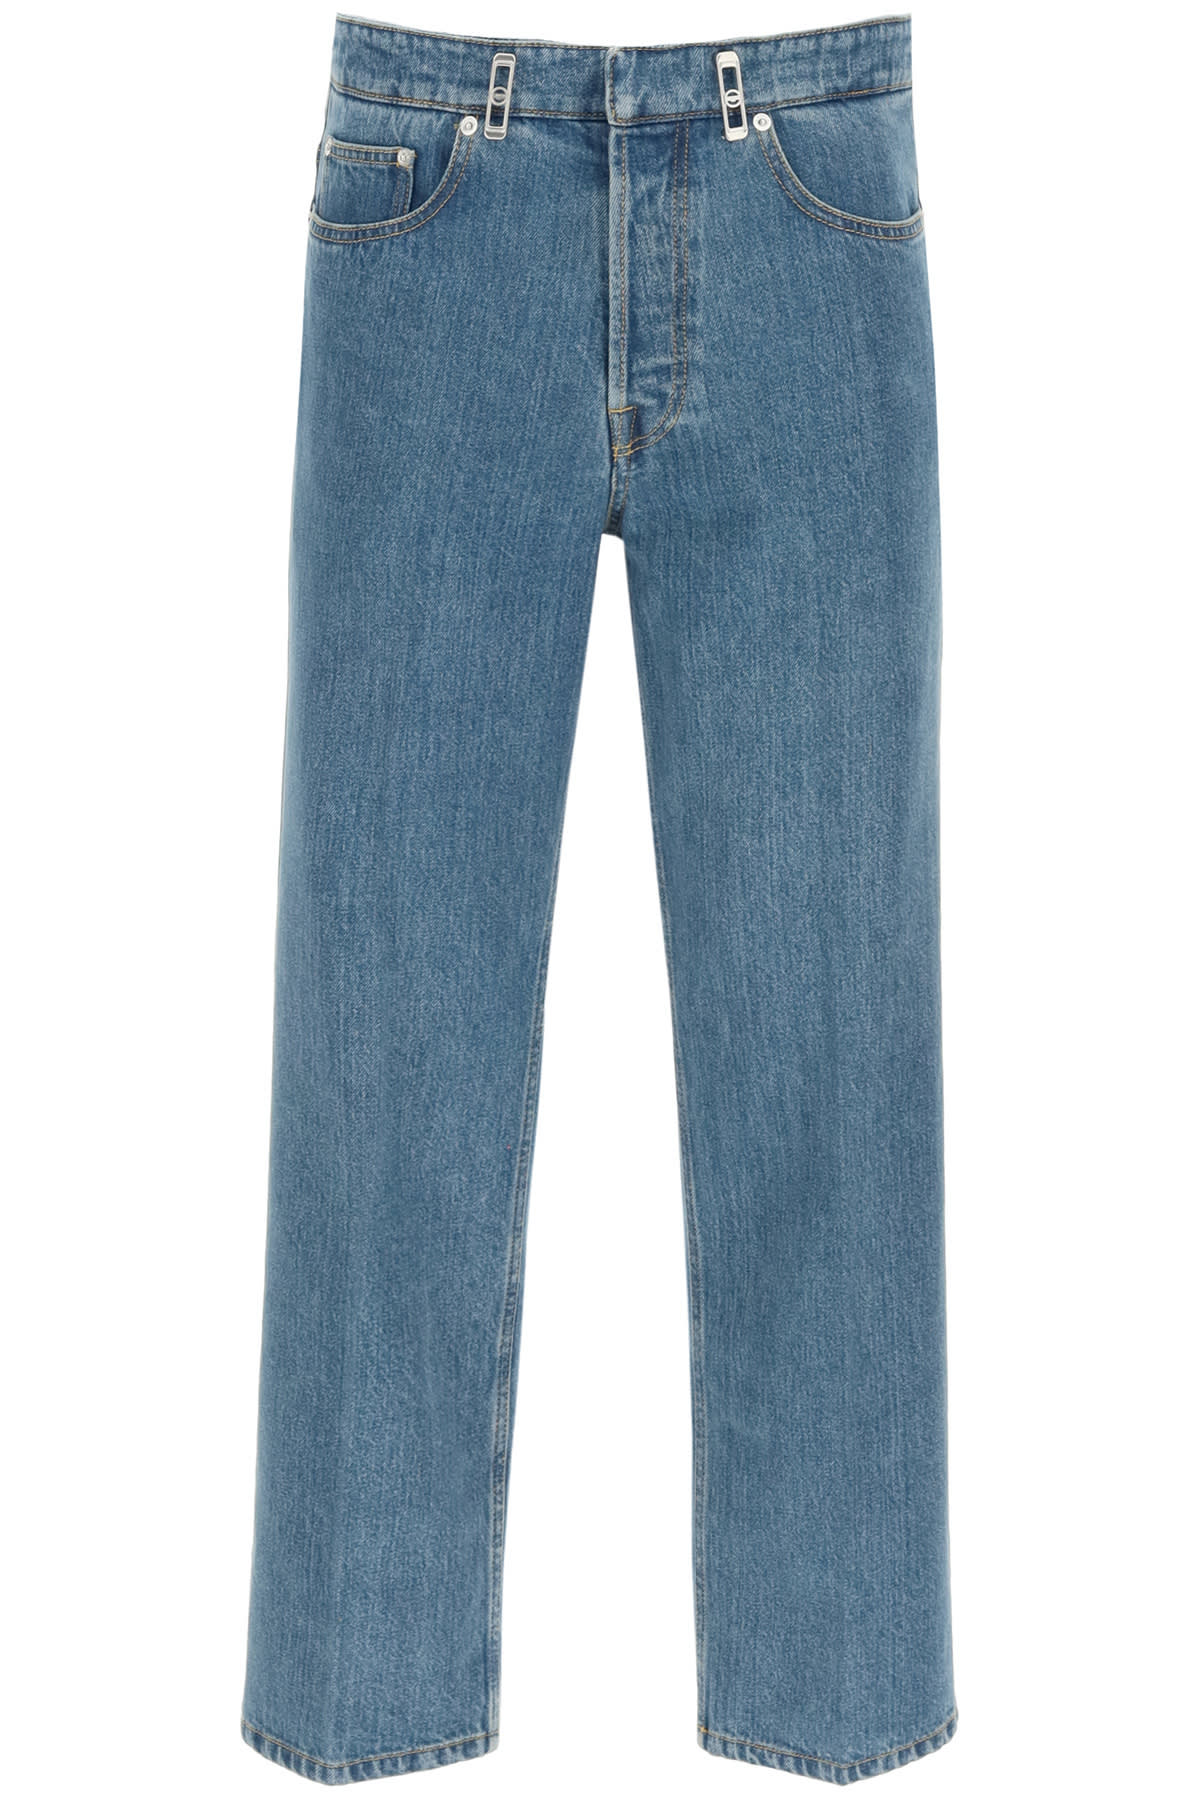 Lanvin Jeans With Crease